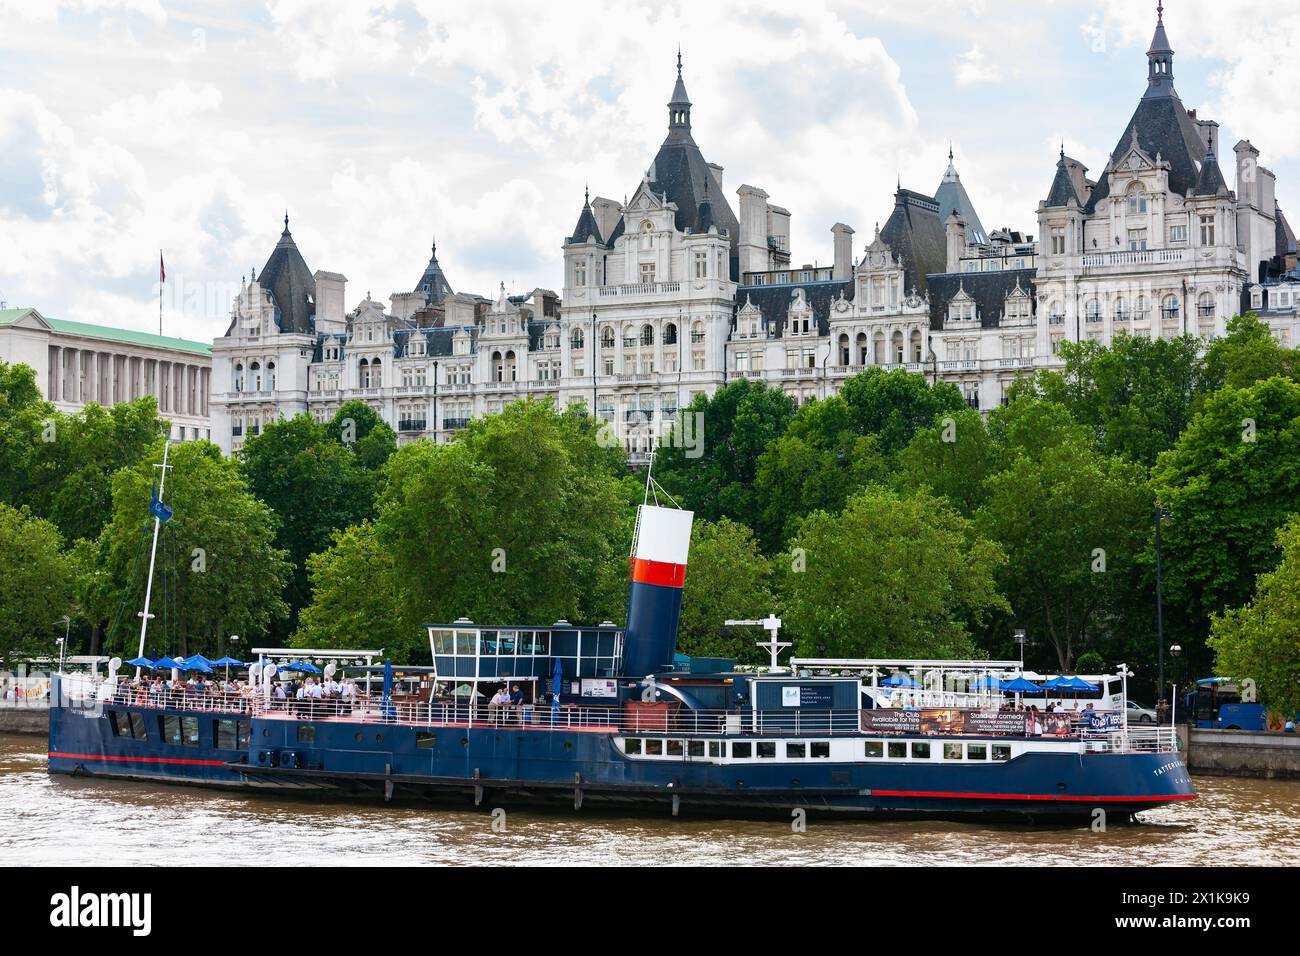 London, United Kingdom - June 29, 2010 : Tattershall Castle . Floating pub on River Thames in front of The United Nations UK building. Stock Photo